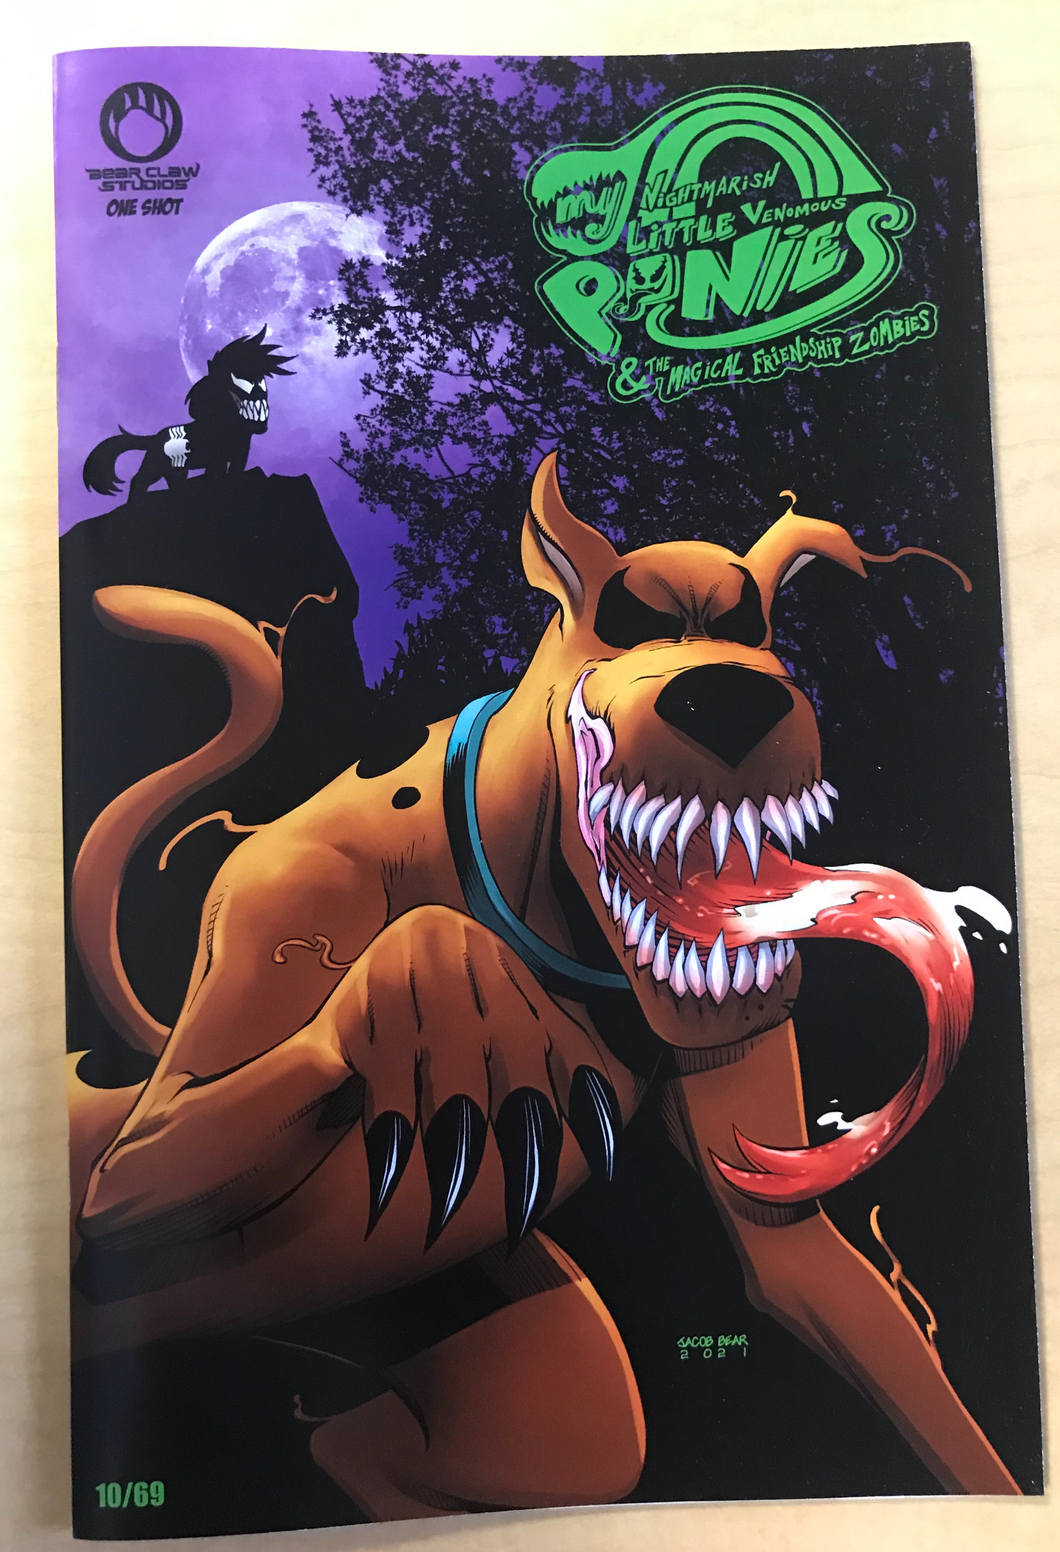 My Nightmarish Little Venomous Ponies & Magical friendship Zombies #1 Scooby Doo Venomized Homage DRESS Variant Cover by Jacob Bear BooKooComix Exclusive Limited to 69 Serial Numbered Copies!!!